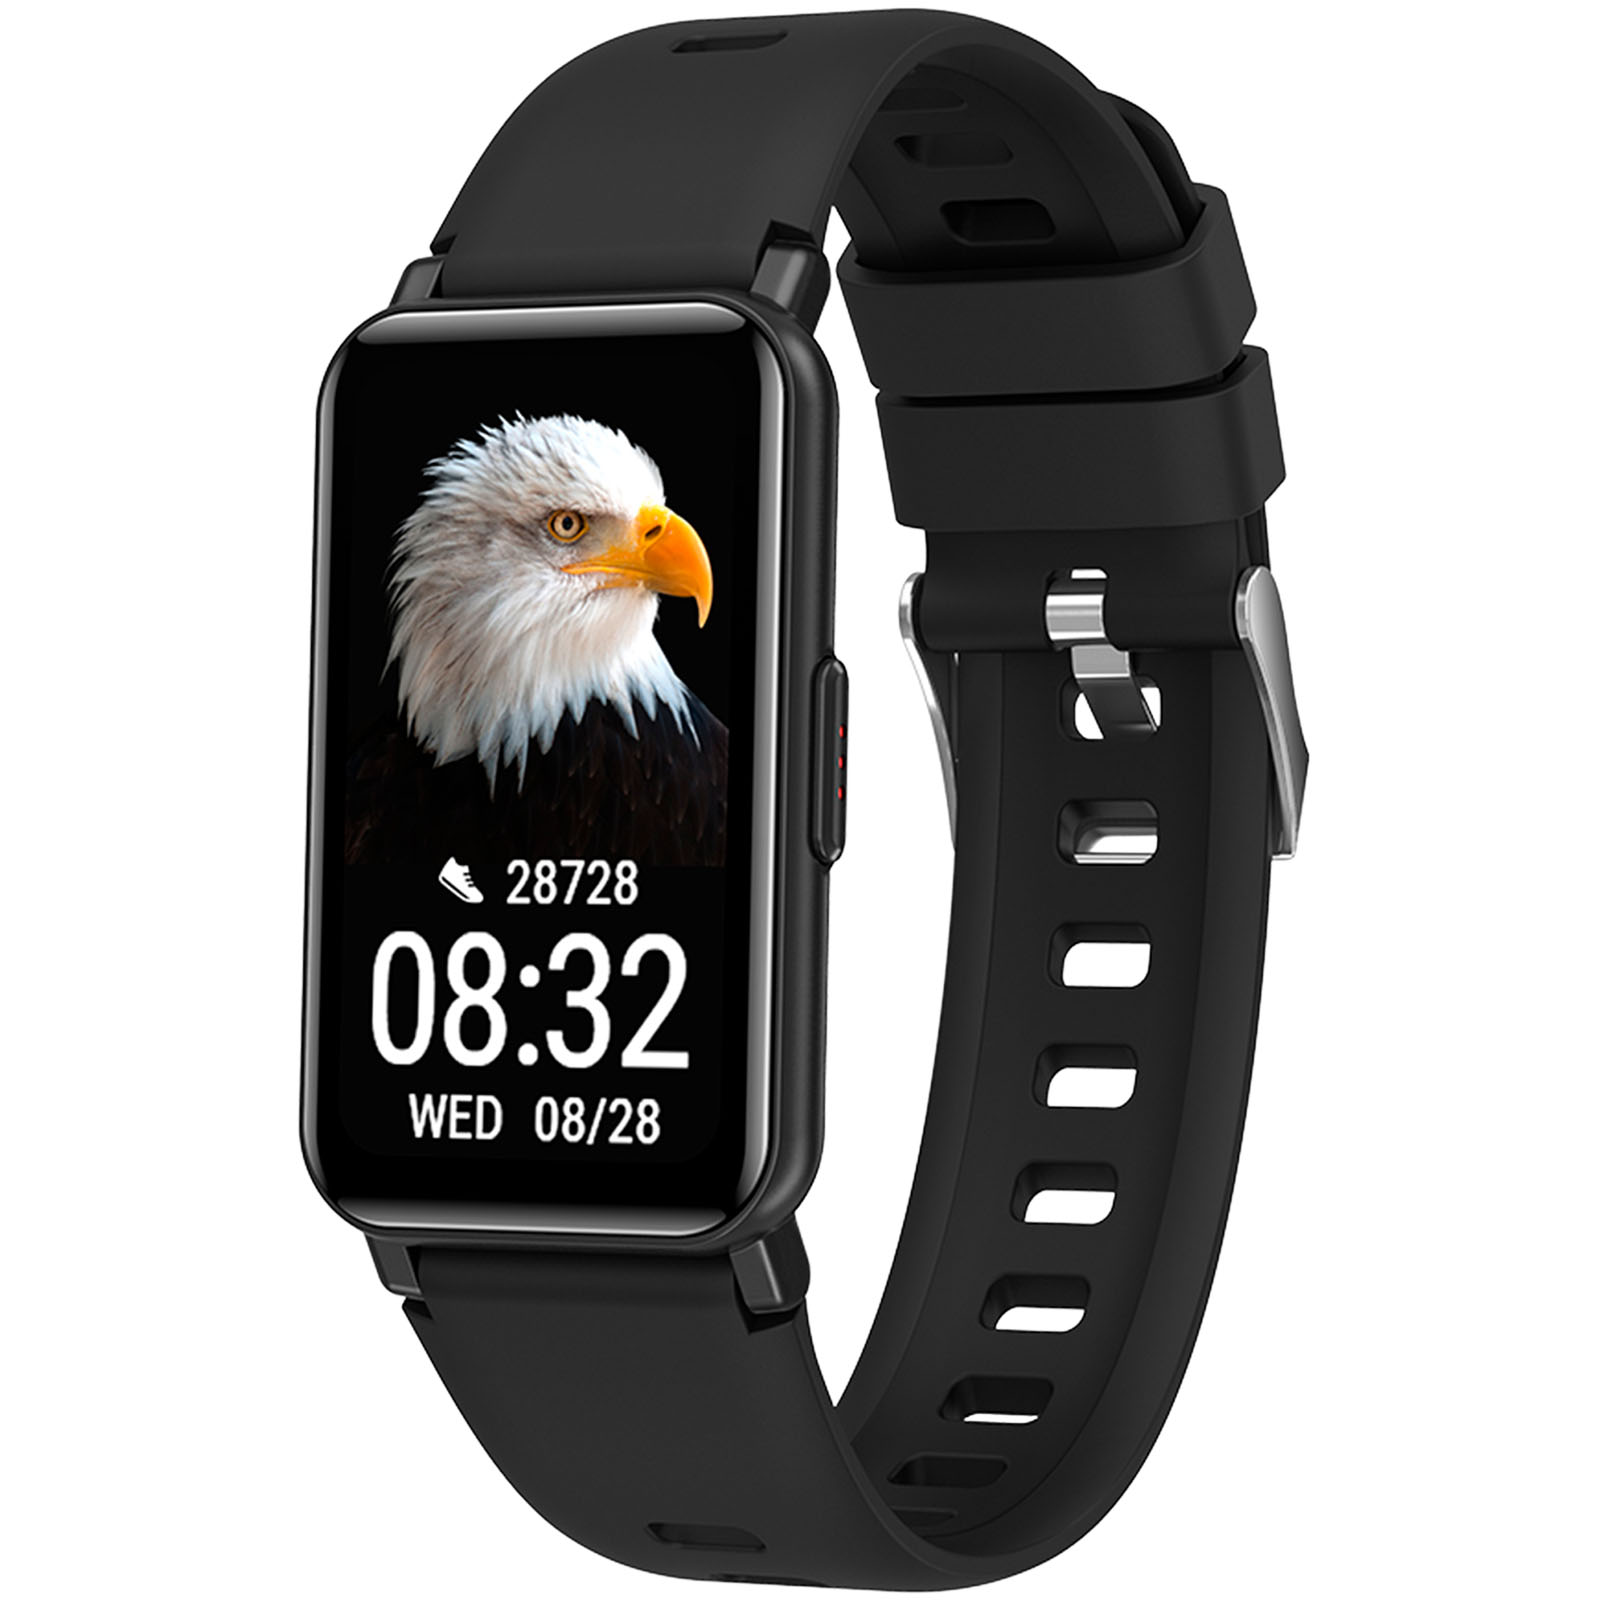 Advertising Smartwatches - Prixton AT806 multisport smartband with GPS - 0